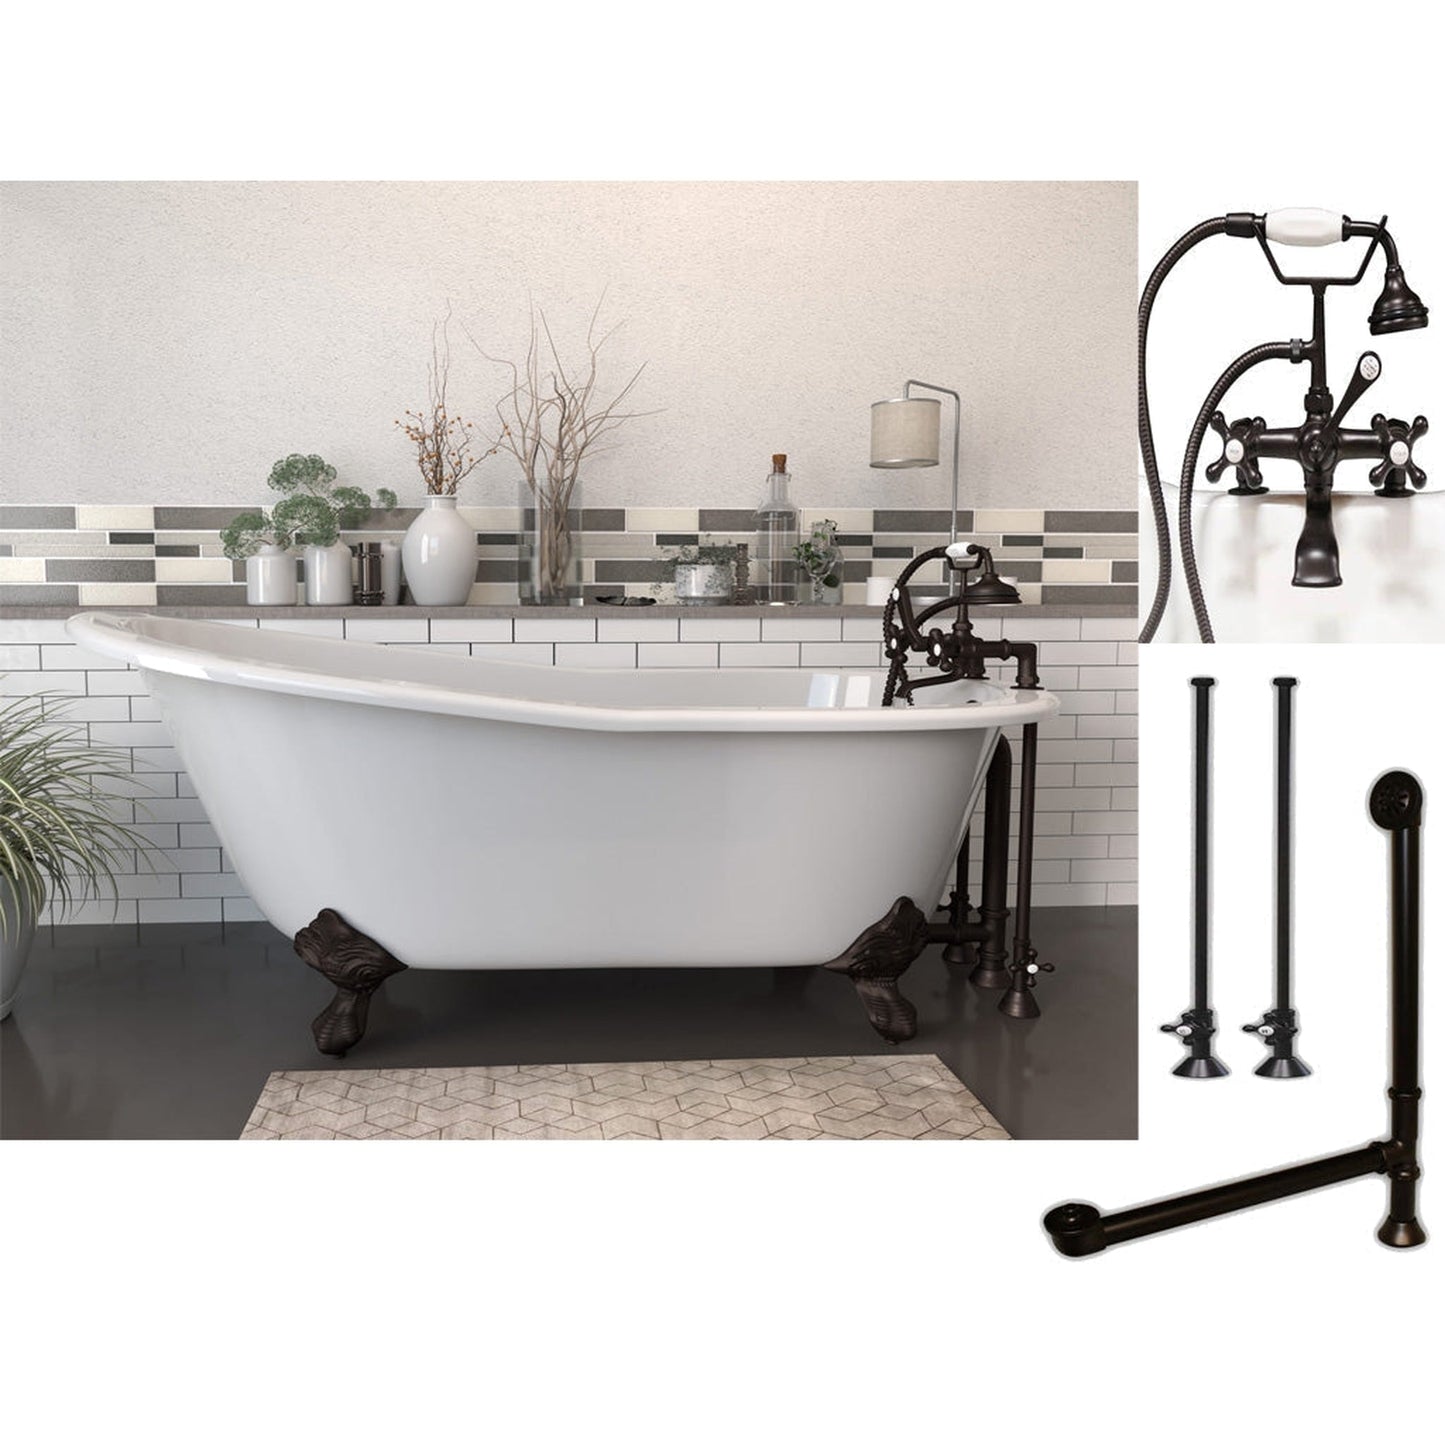 Cambridge Plumbing 61" White Cast Iron Clawfoot Bathtub With Deck Holes And Complete Plumbing Package Including 2” Riser Deck Mount Faucet, Supply Lines, Drain And Overflow Assembly In Oil Rubbed Bronze